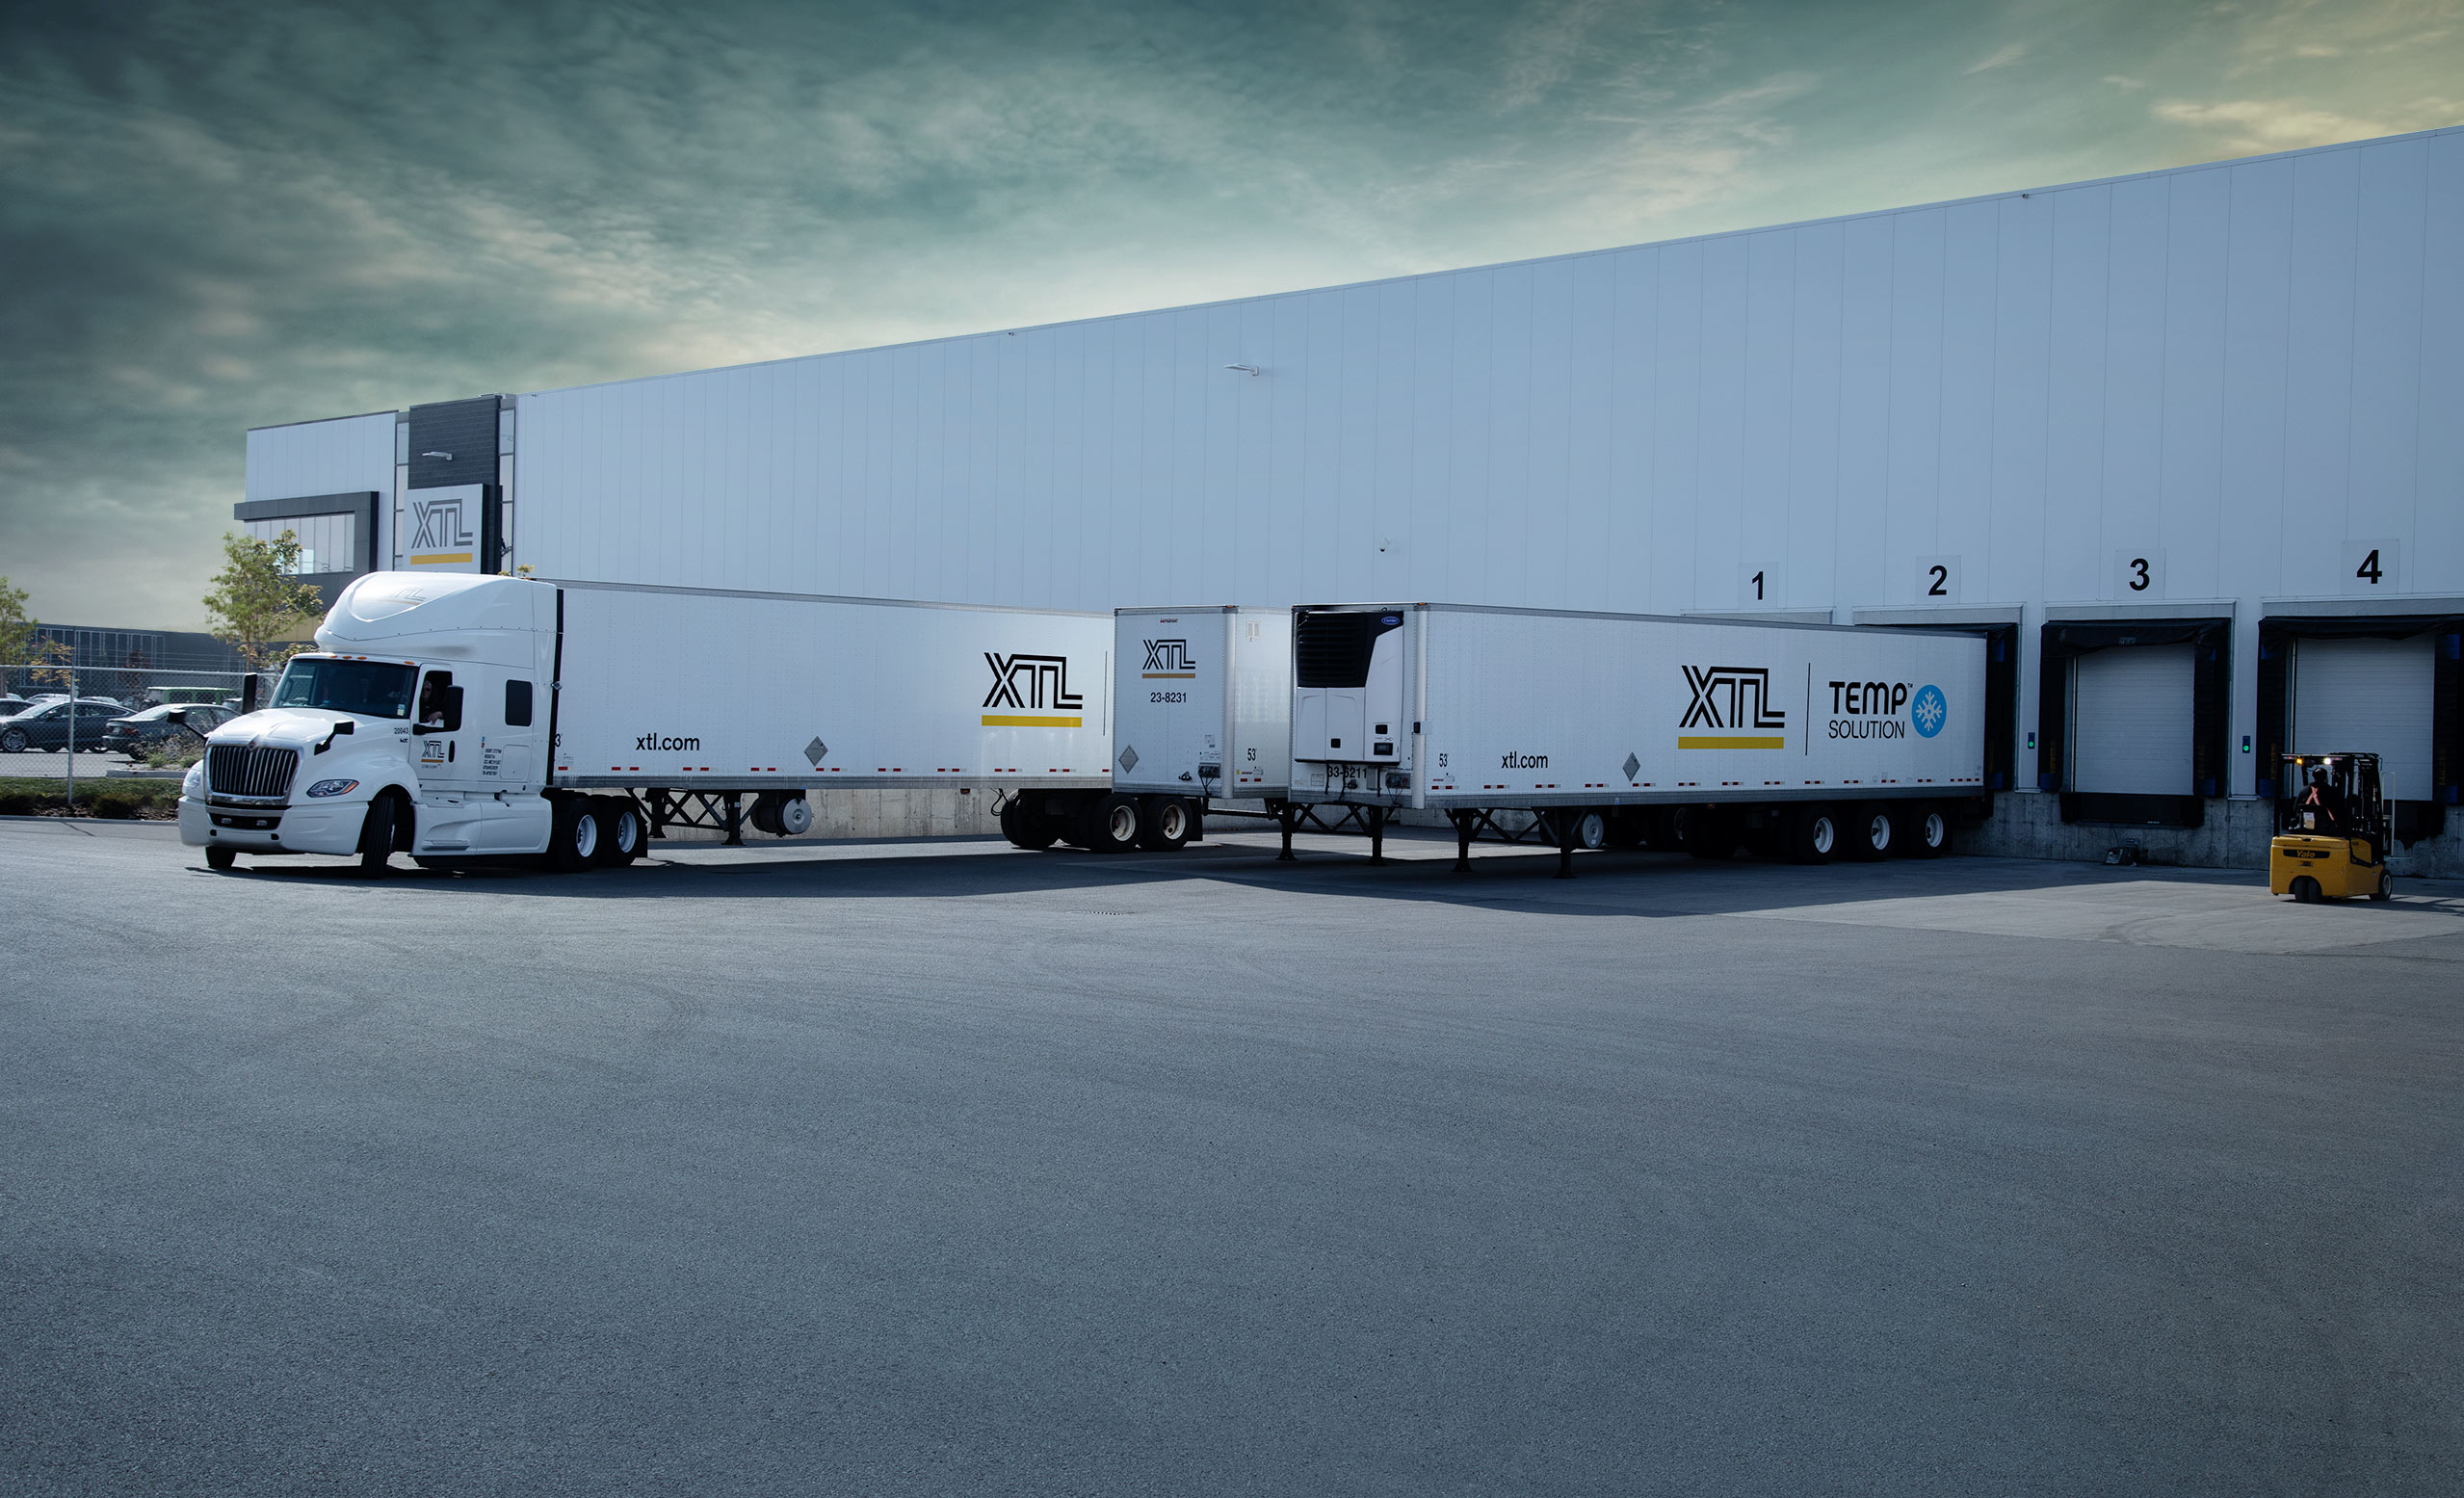 XTL warehousing and crossdock terminal with a truck and multiple trailers